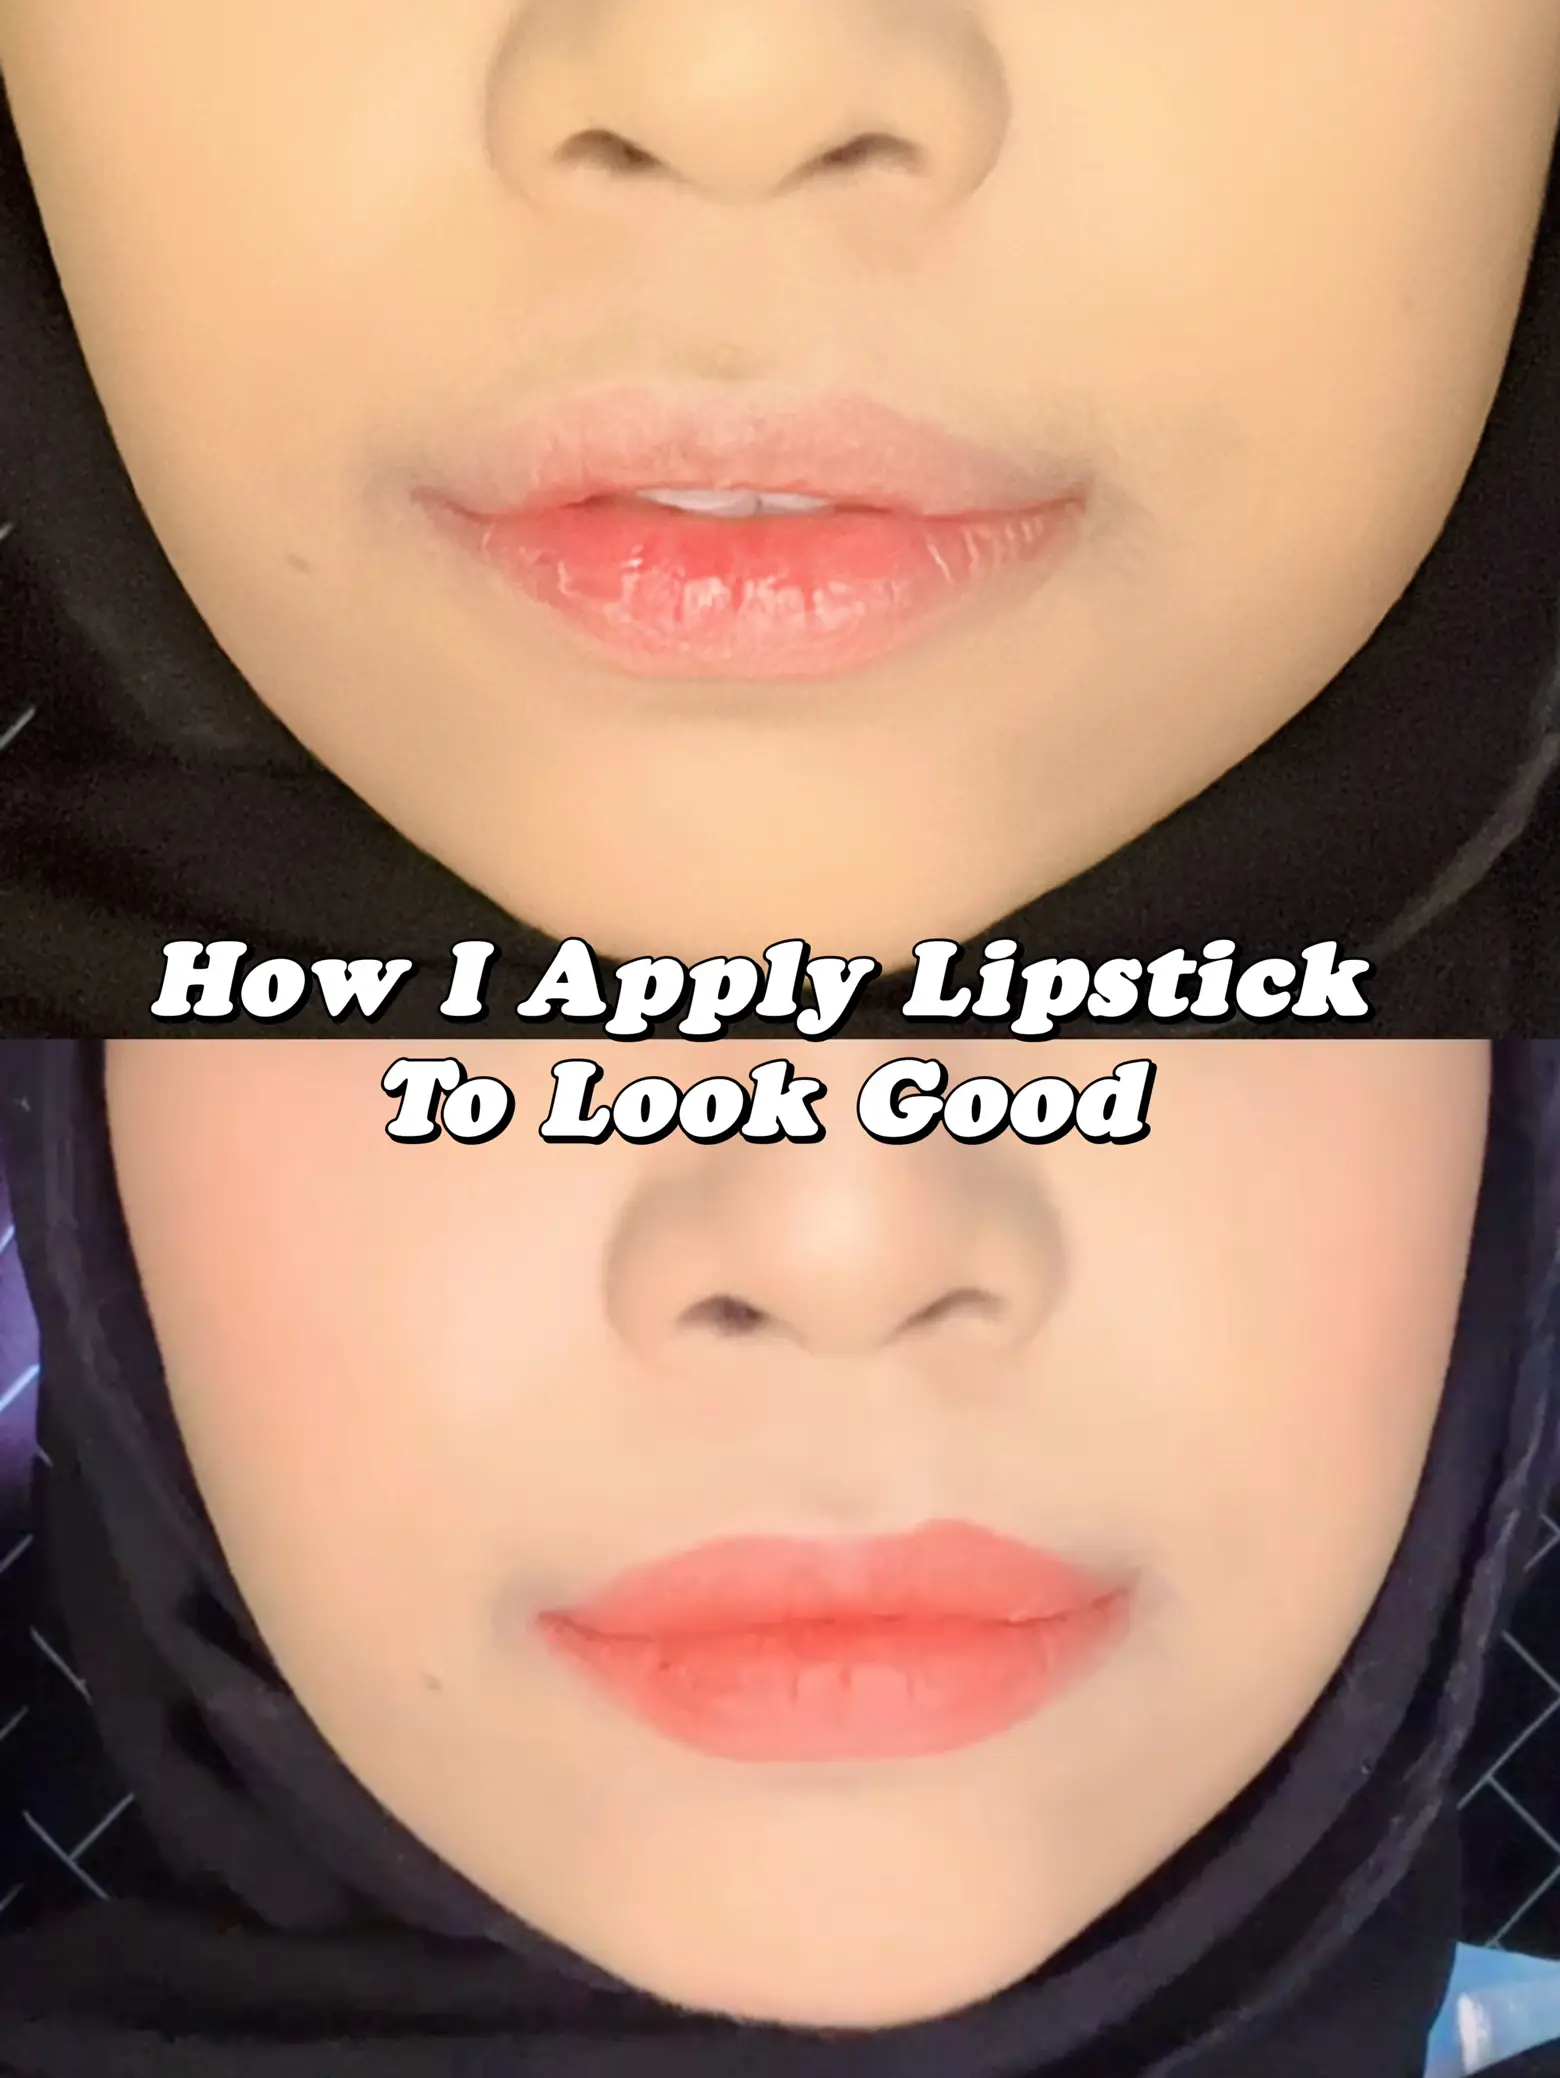 How I Apply My Lipstick To Look Good, Gallery posted by Hani 🐝